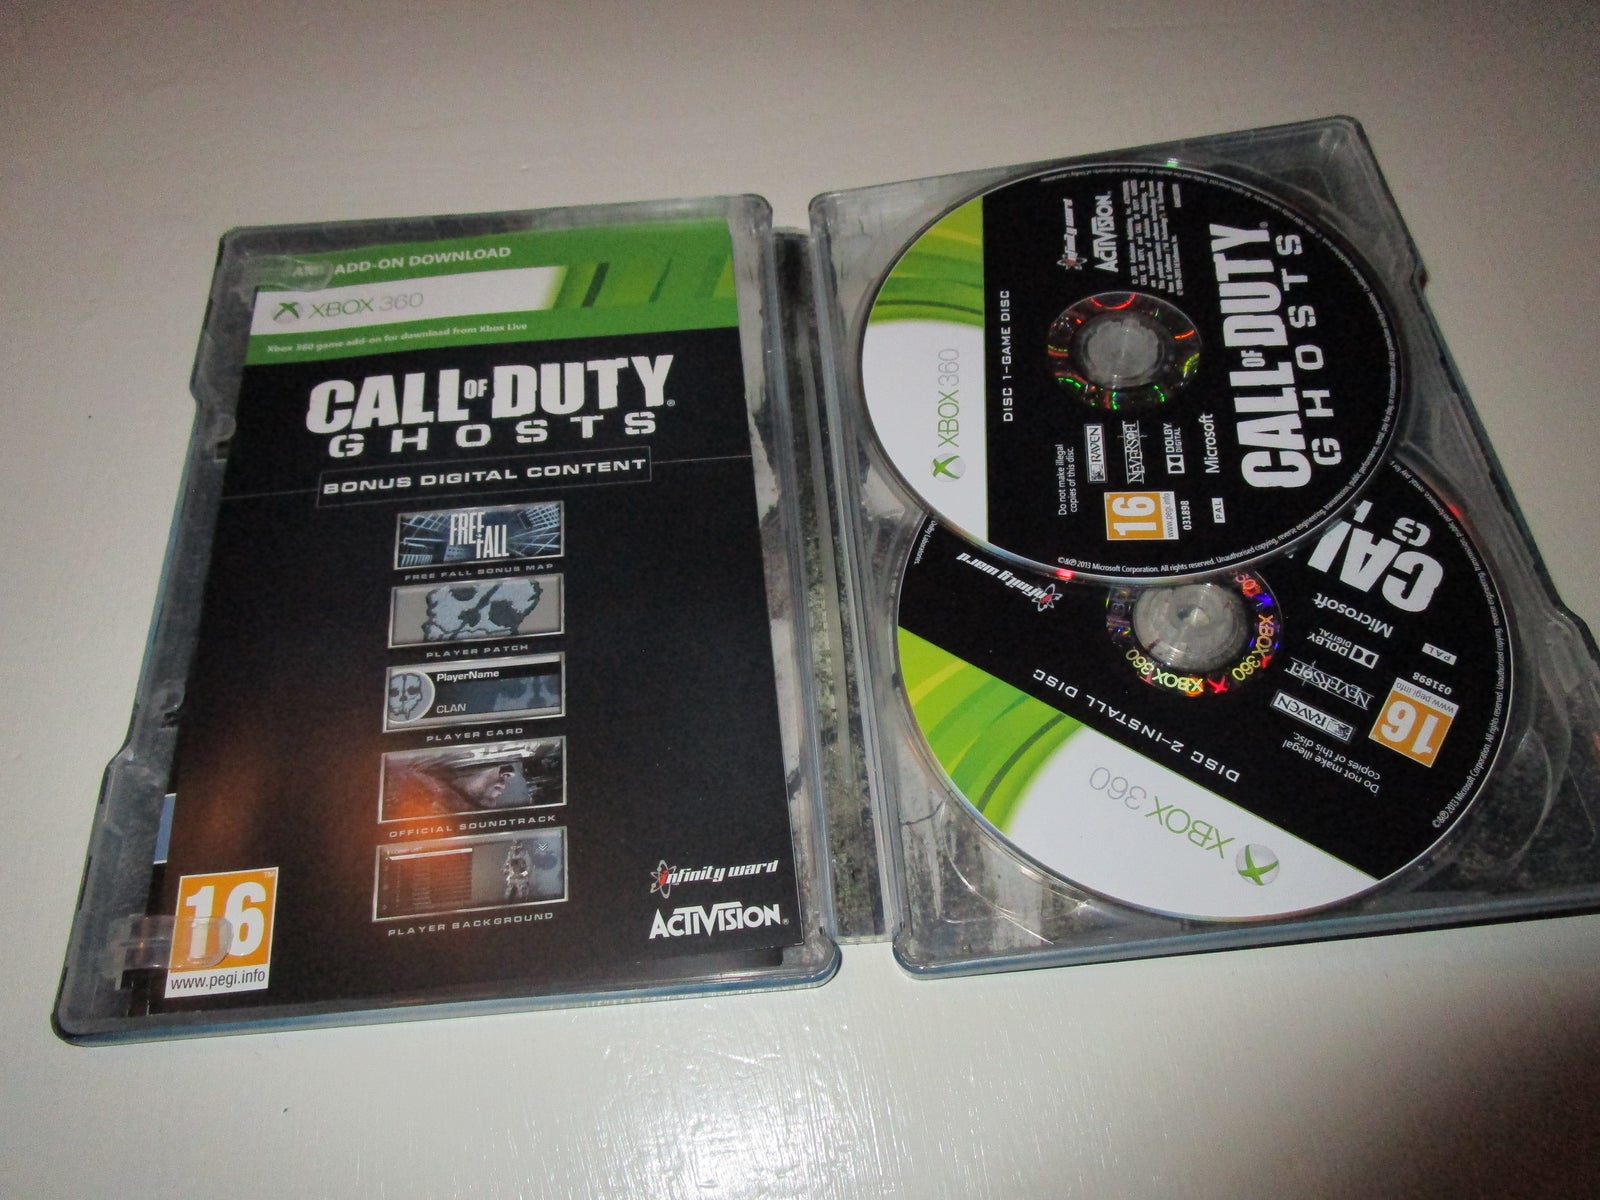 XBOX 360 Call Of Duty Ghosts DVD Install & Game Discs